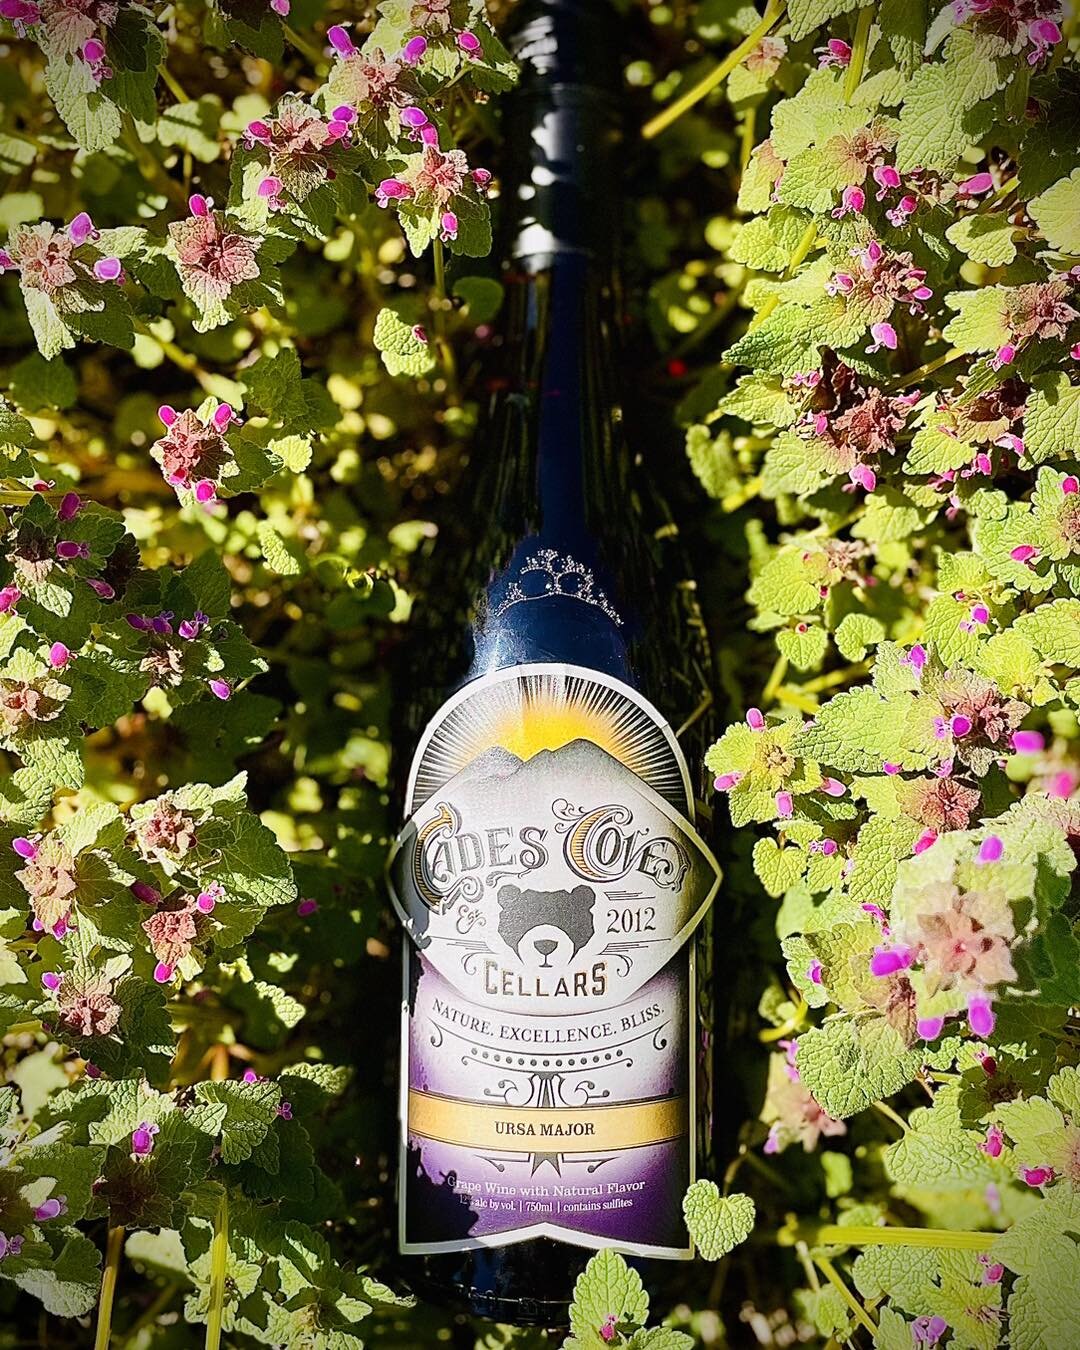 ✨The official release of Ursa Major is here!✨

🫐This beautiful effervescent blueberry wine is sure to please everyone at your next outdoor gathering. Ursa Major pairs well with BBQ chicken, charcuterie boards, and cheesecake! 

📍Now a permanent exc